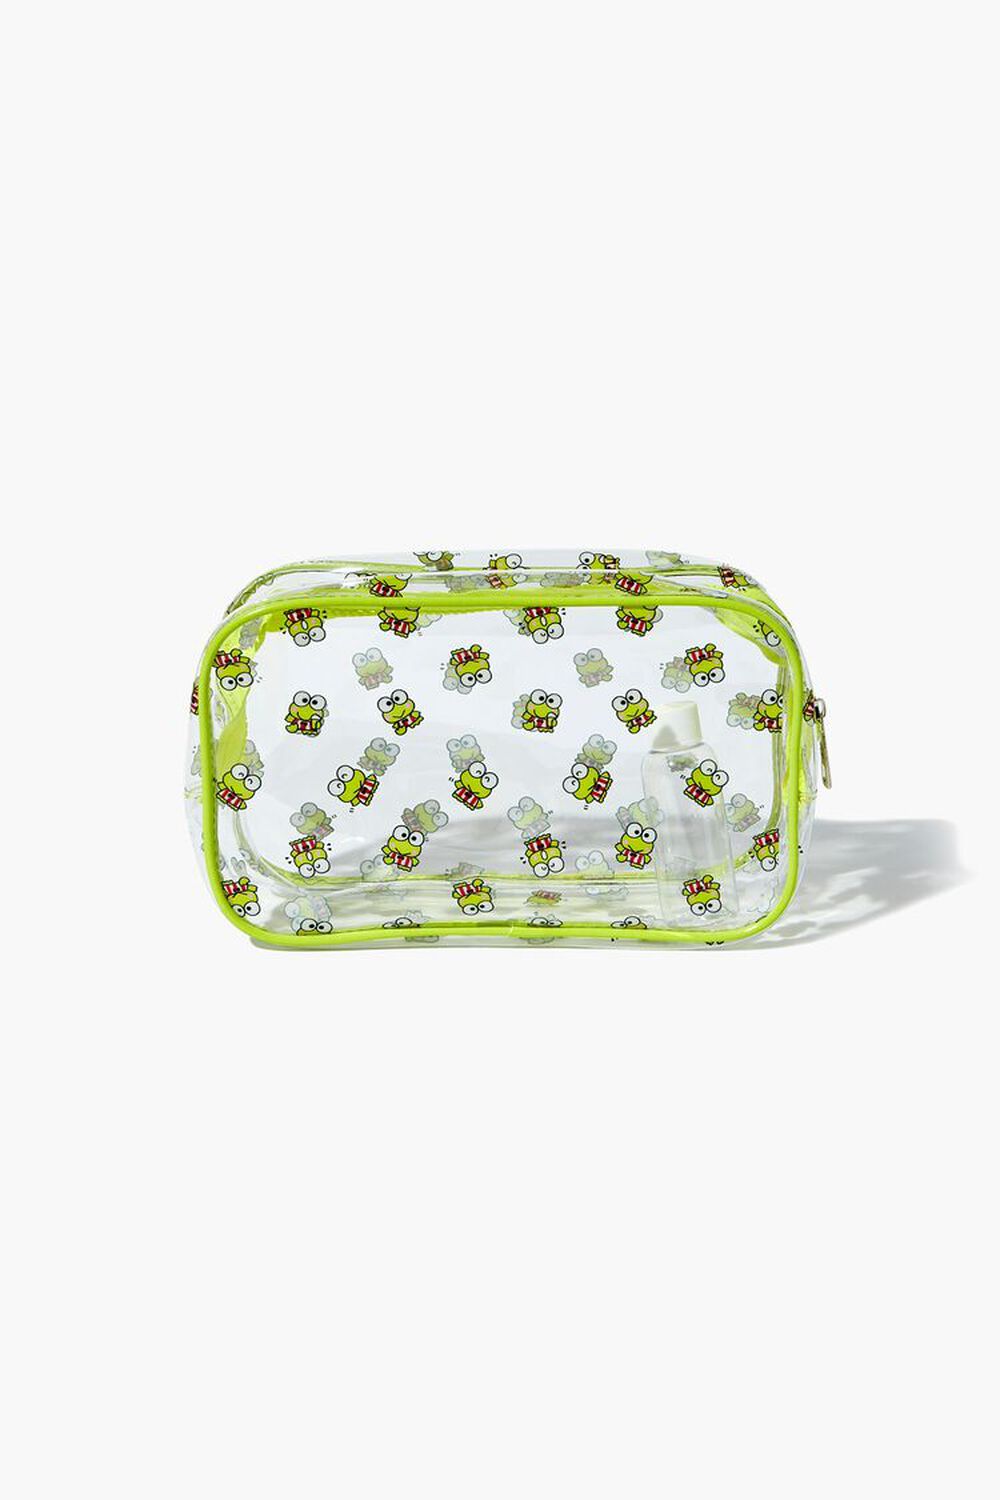 CLEAR/GREEN Hello Kitty & Friends Keroppi Makeup Bag, image 1